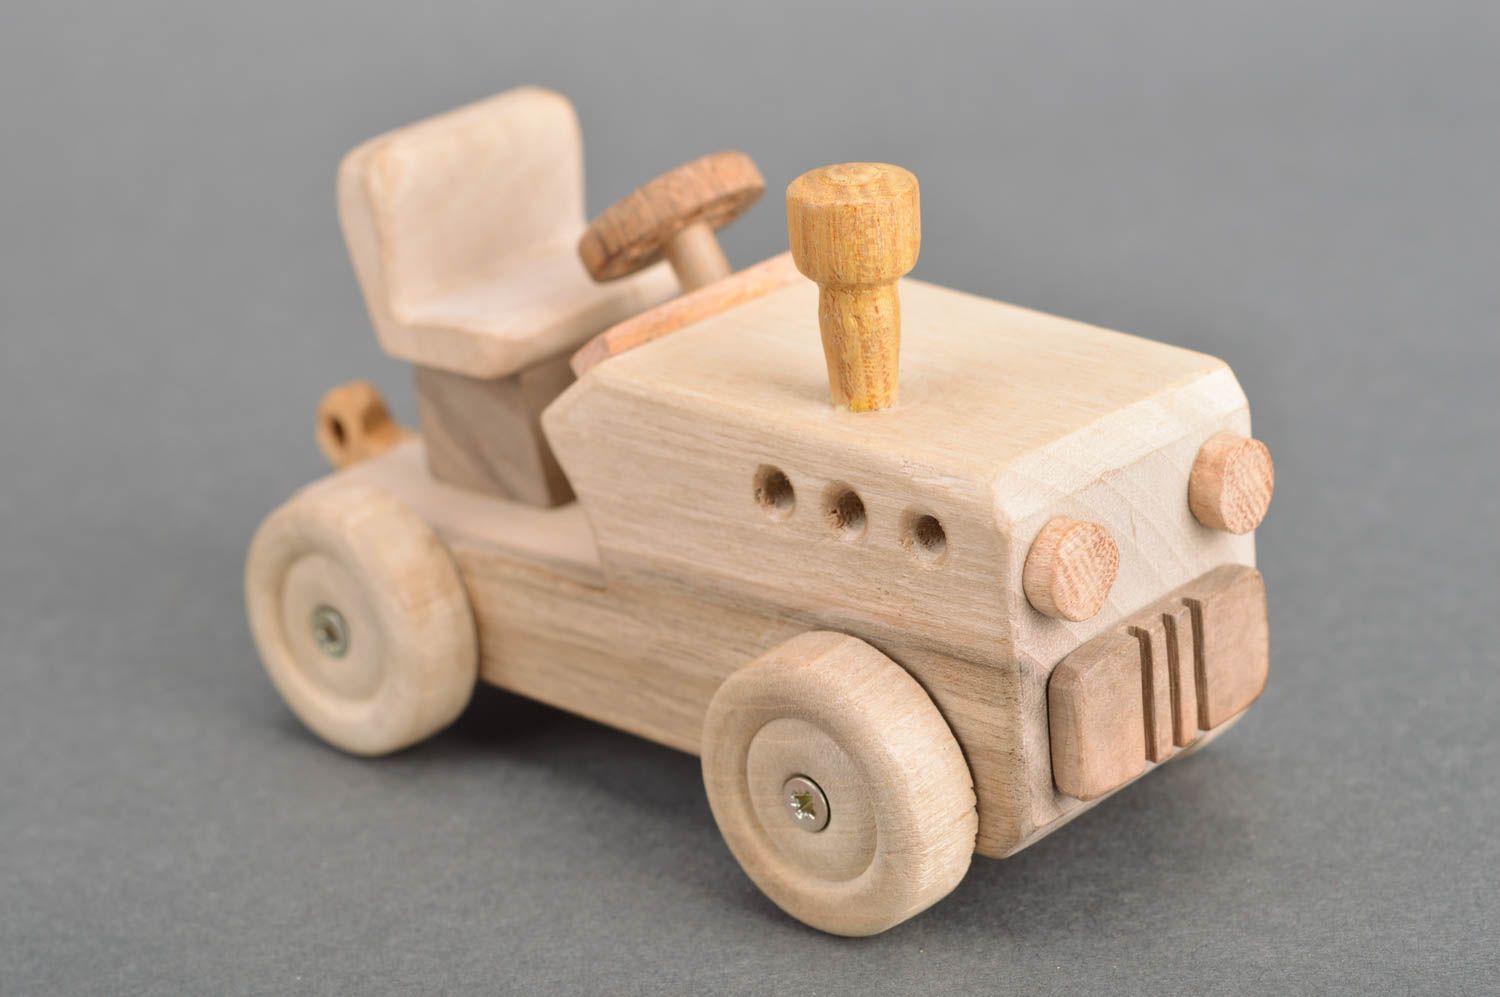 Handmade eco friendly large light wooden toy car for children over 6 years old photo 2